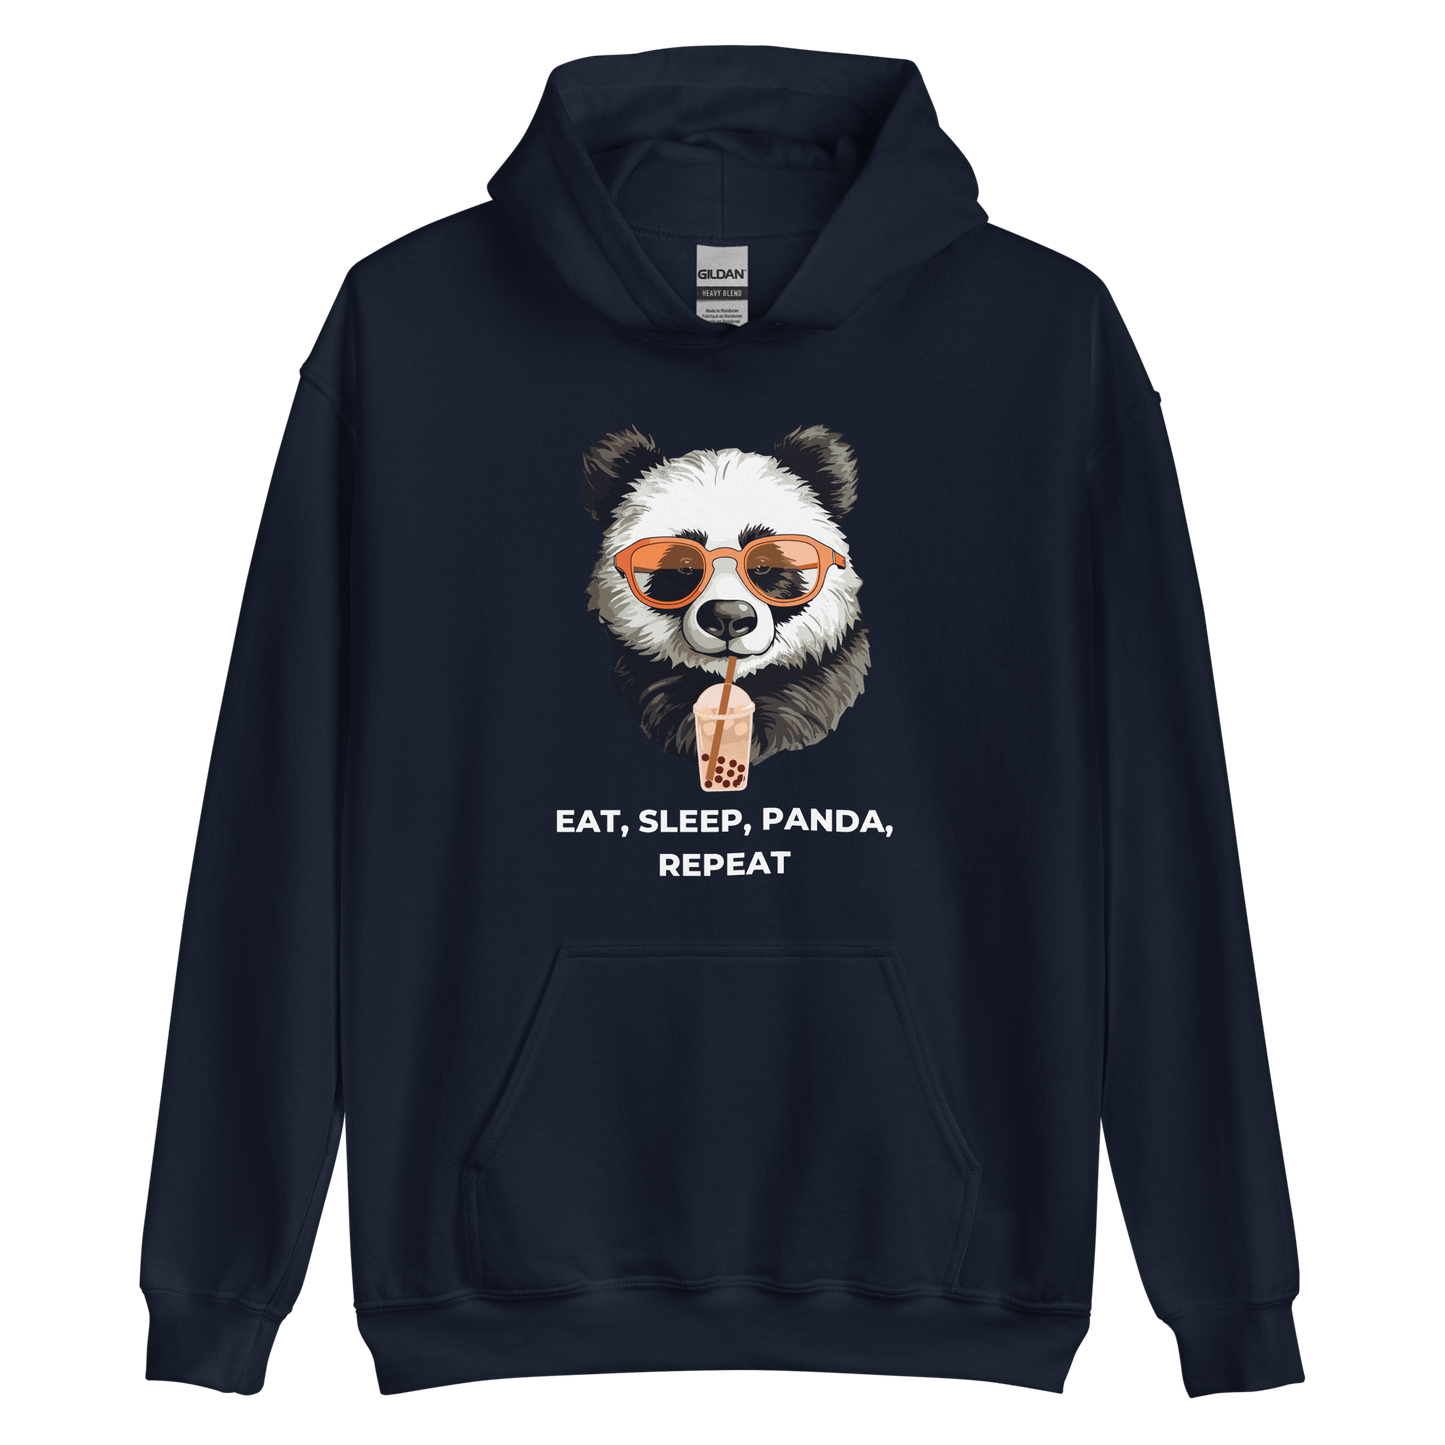 Navy Panda Hoodie featuring the hilarious Eat, Sleep, Panda, Repeat graphic on the chest - Funny Graphic Panda Hoodies - Boozy Fox